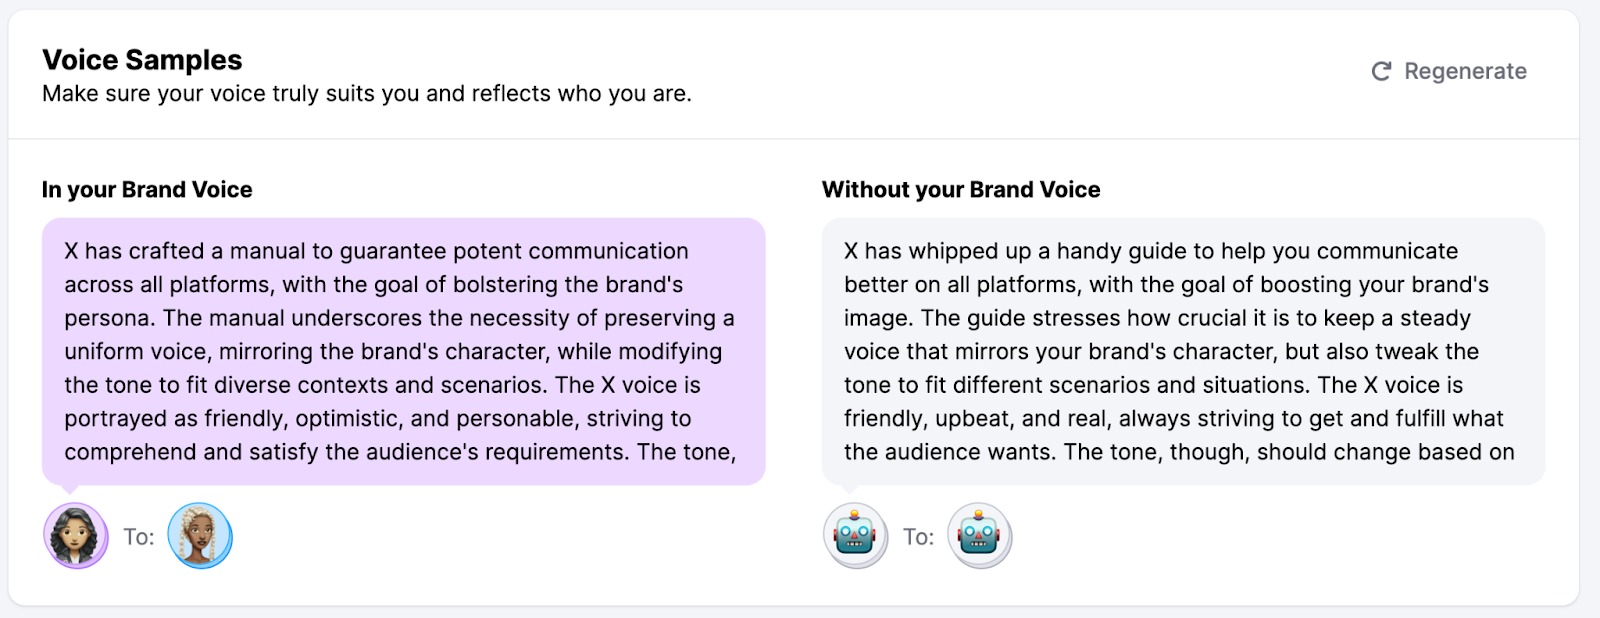 An example of the 'Voice Samples' section in the AI-generated Brand voice.